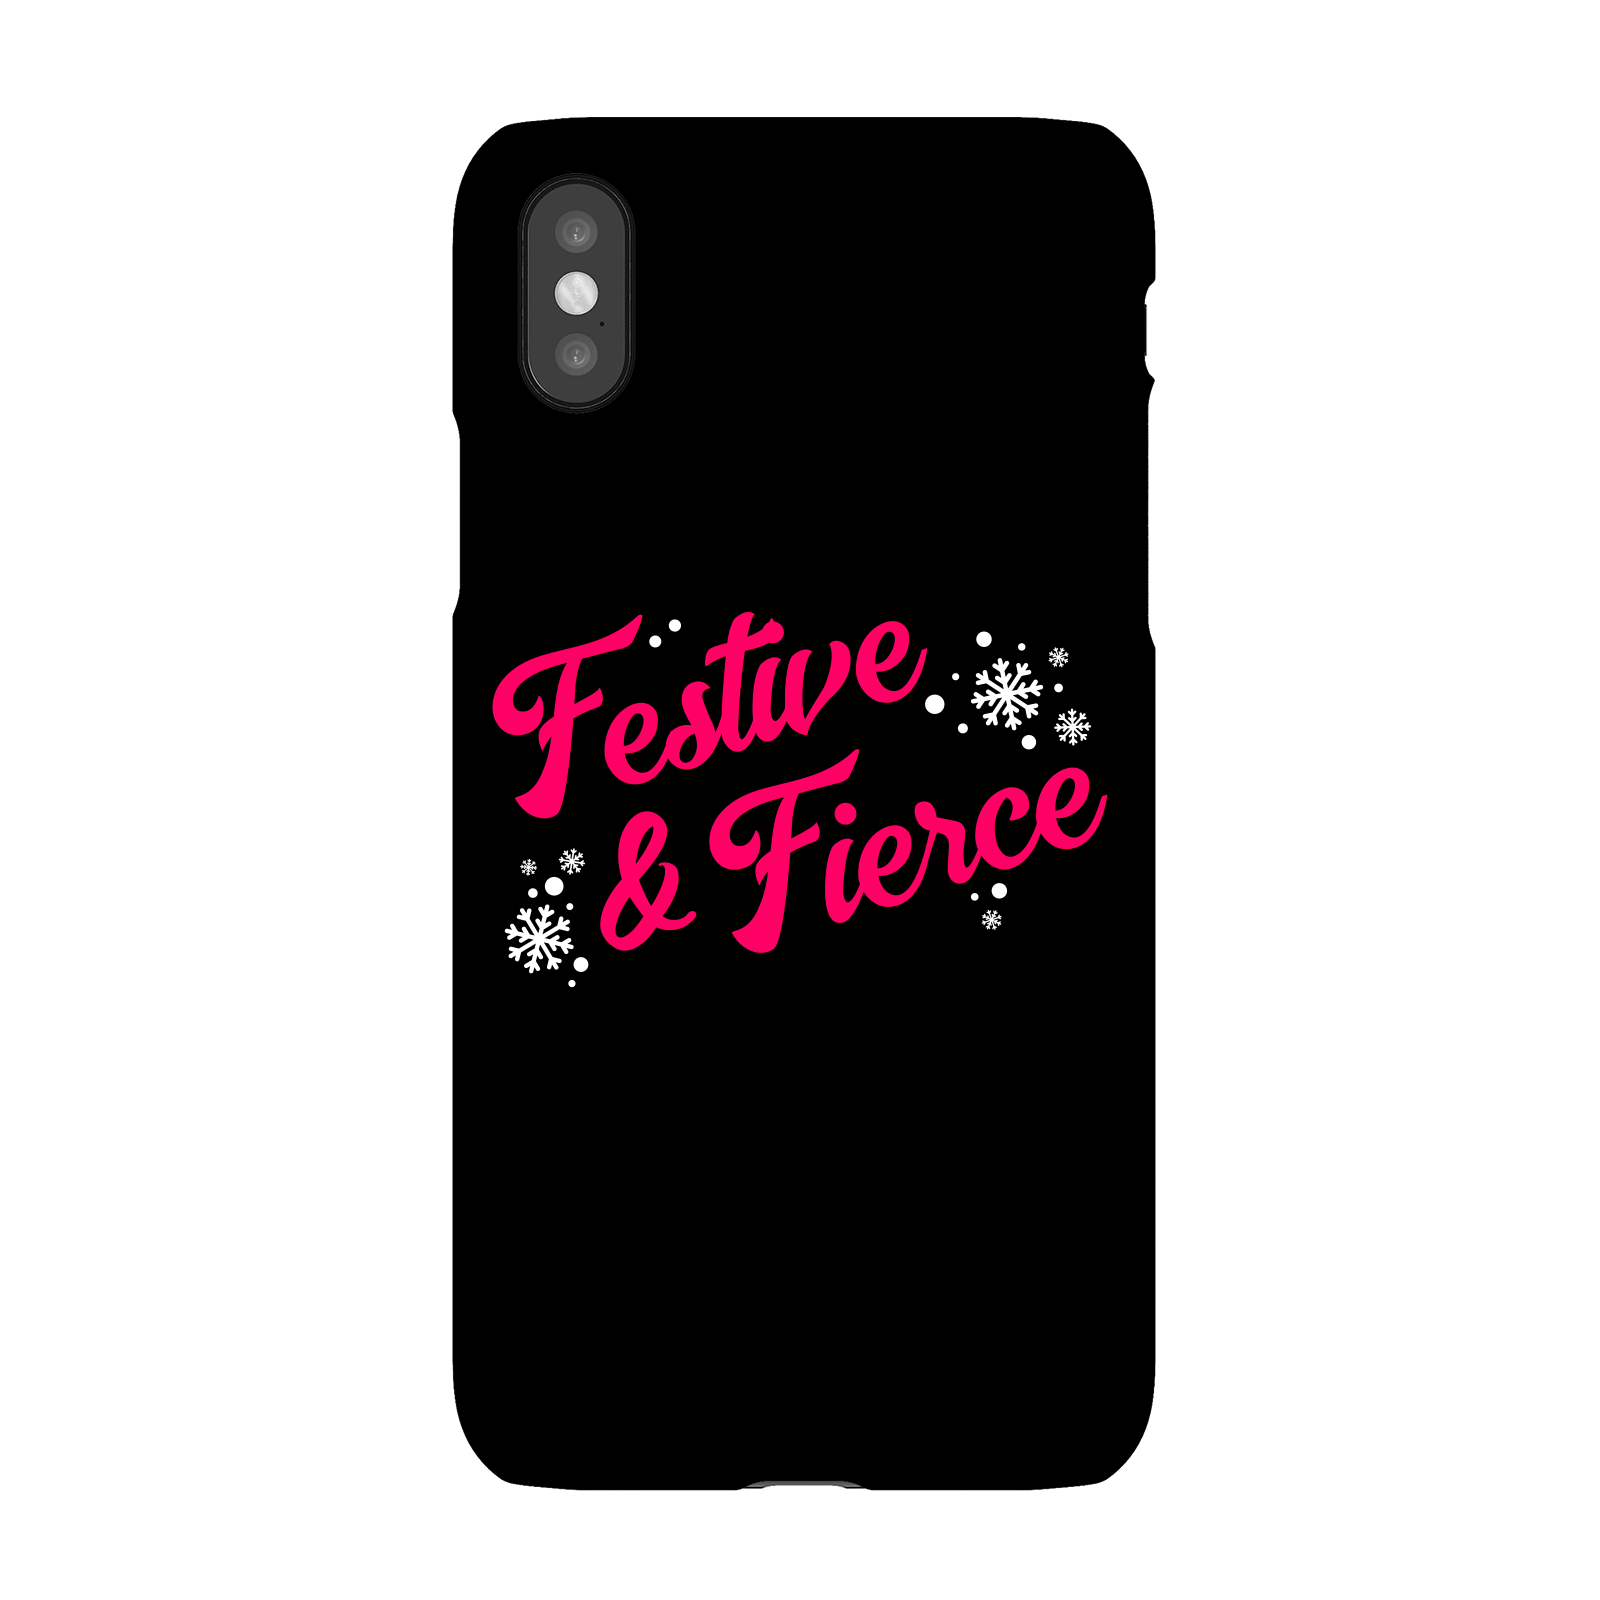 festive & fierce phone case for iphone and android - samsung s10e - snap case - matte